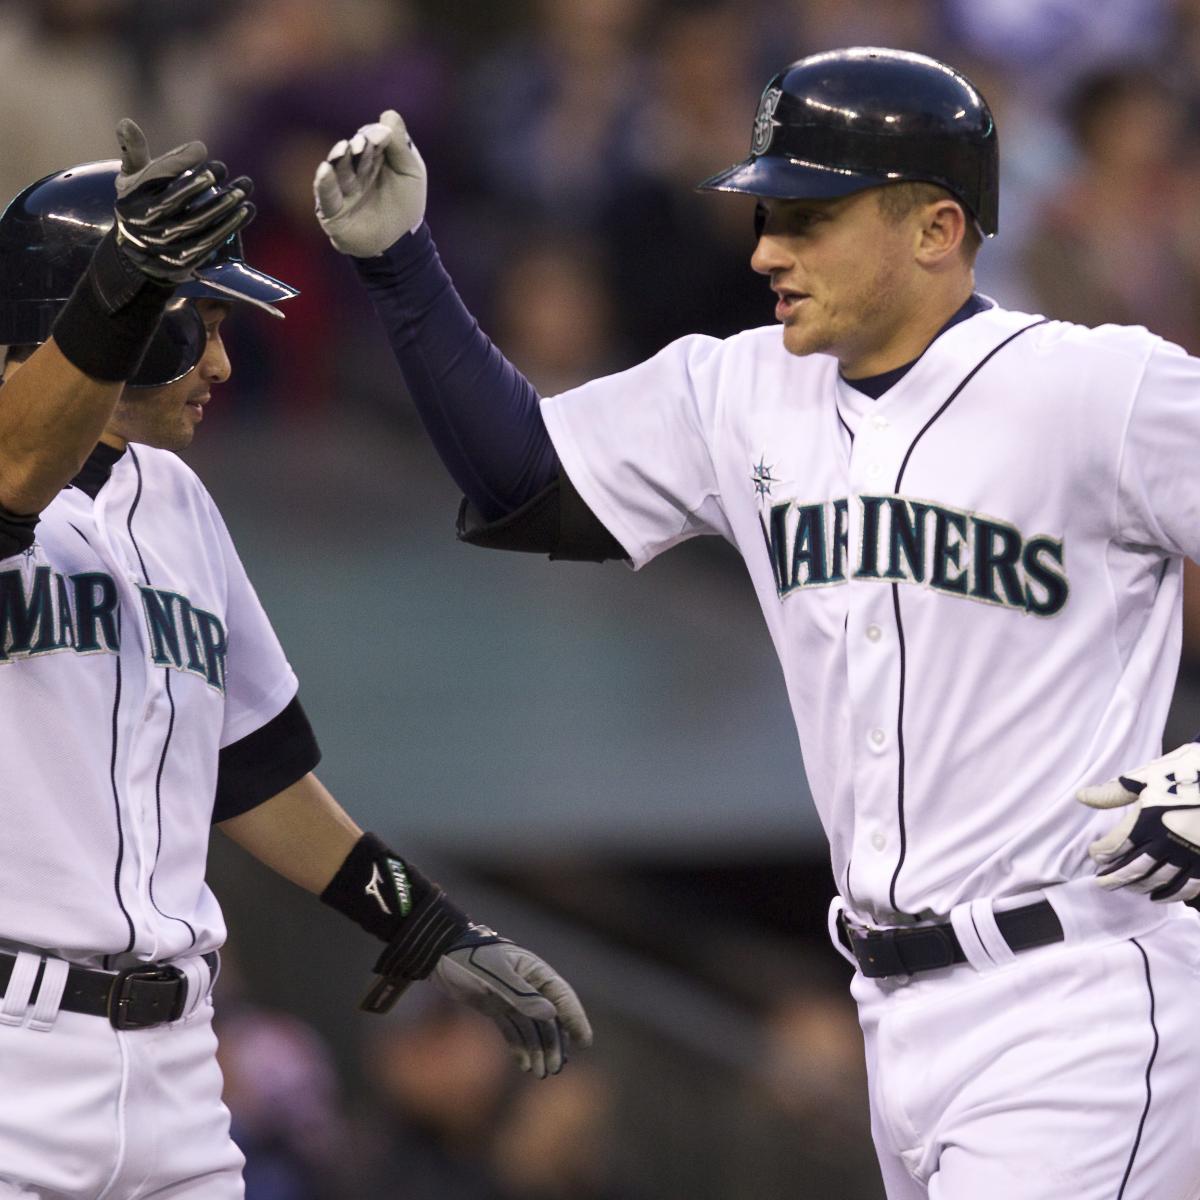 Seattle Mariners Record Attendance Lows Could Spell Trouble for the